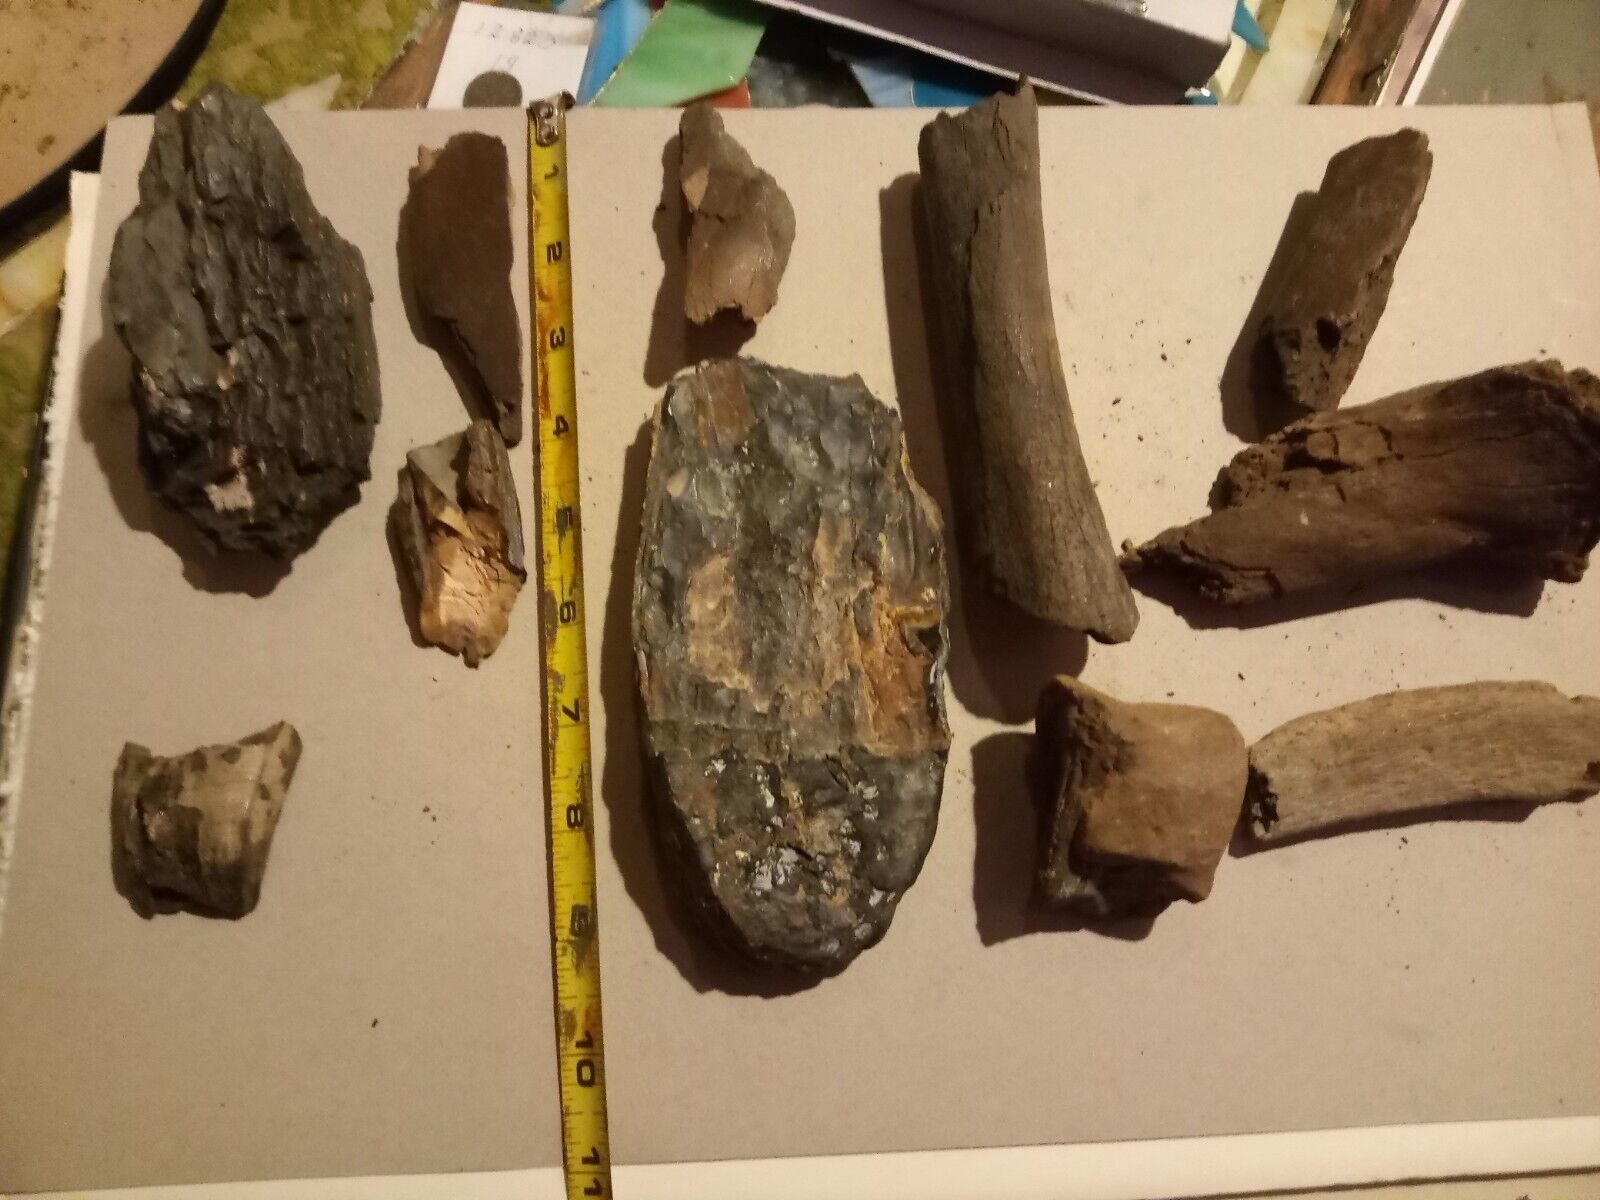 11 FOSSIL BONES FLORIDA. FOSSILS ICE AGE TOOTH SKELETON PARTS 3 Types Of Species